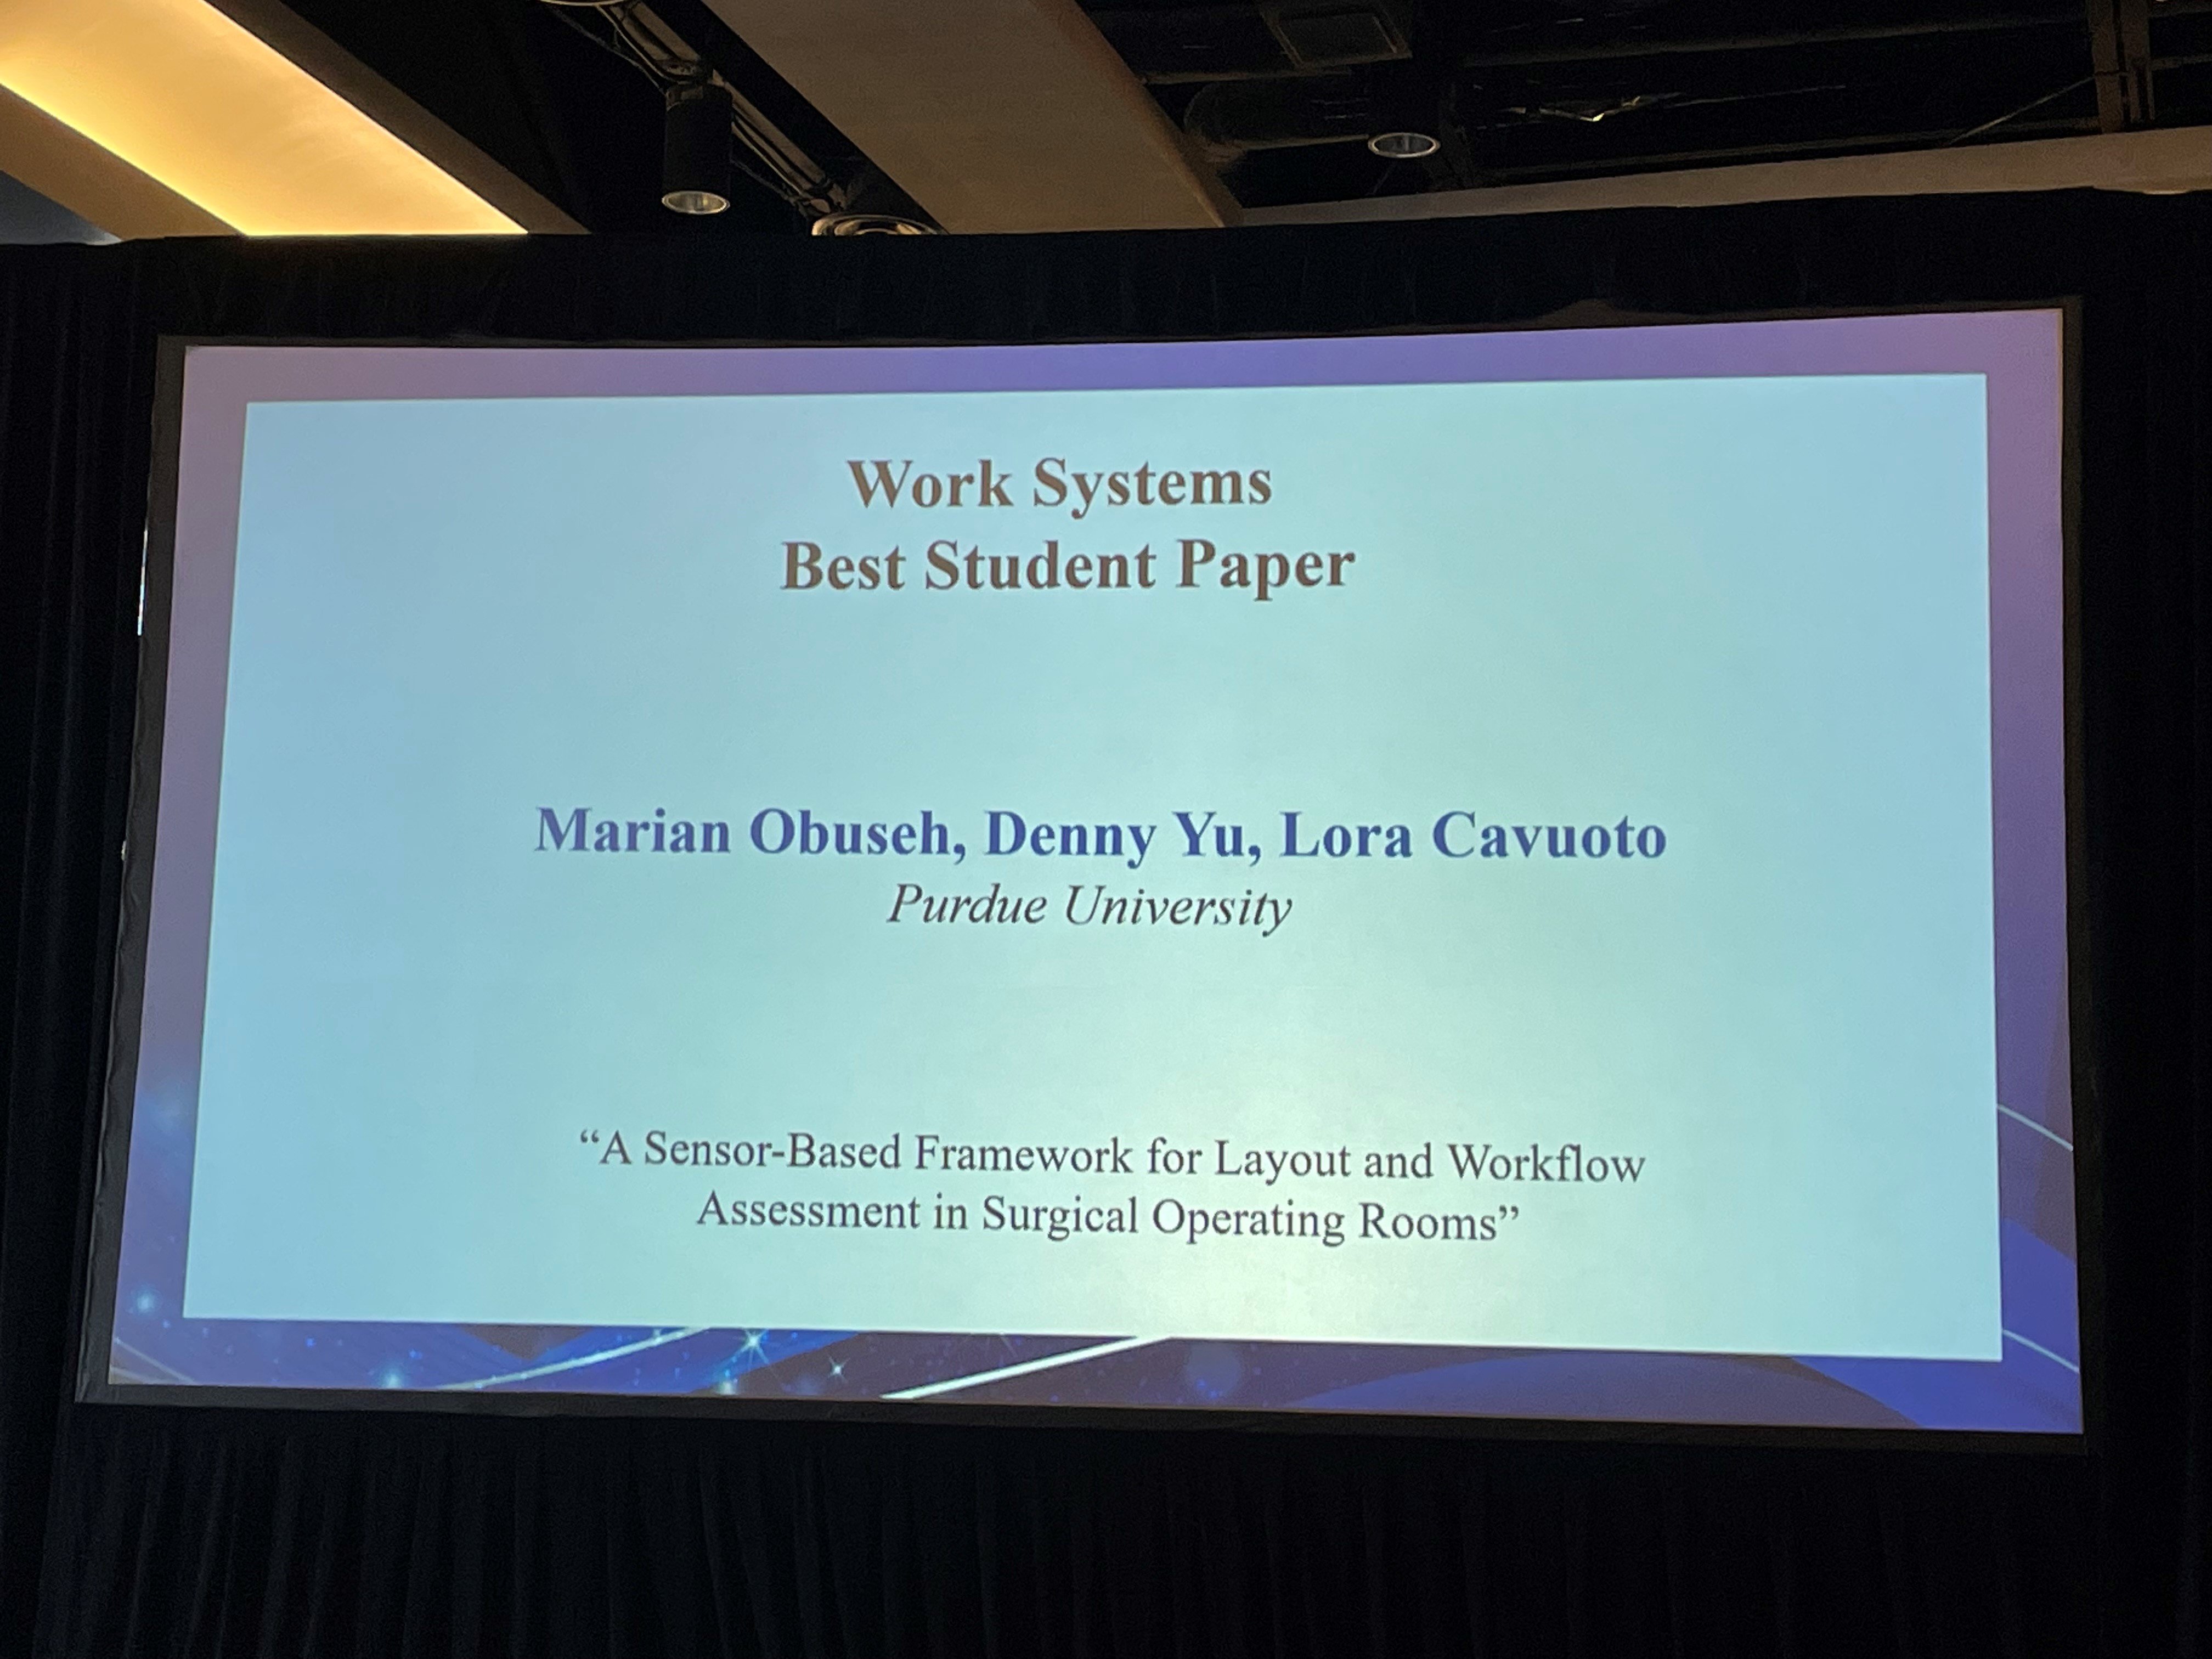 Marian Obuseh, along with Associate Professor of Industrial Engineering Denny Yu, recently earned the Work Systems Best Student Paper award at the IISE Conference & Expo.